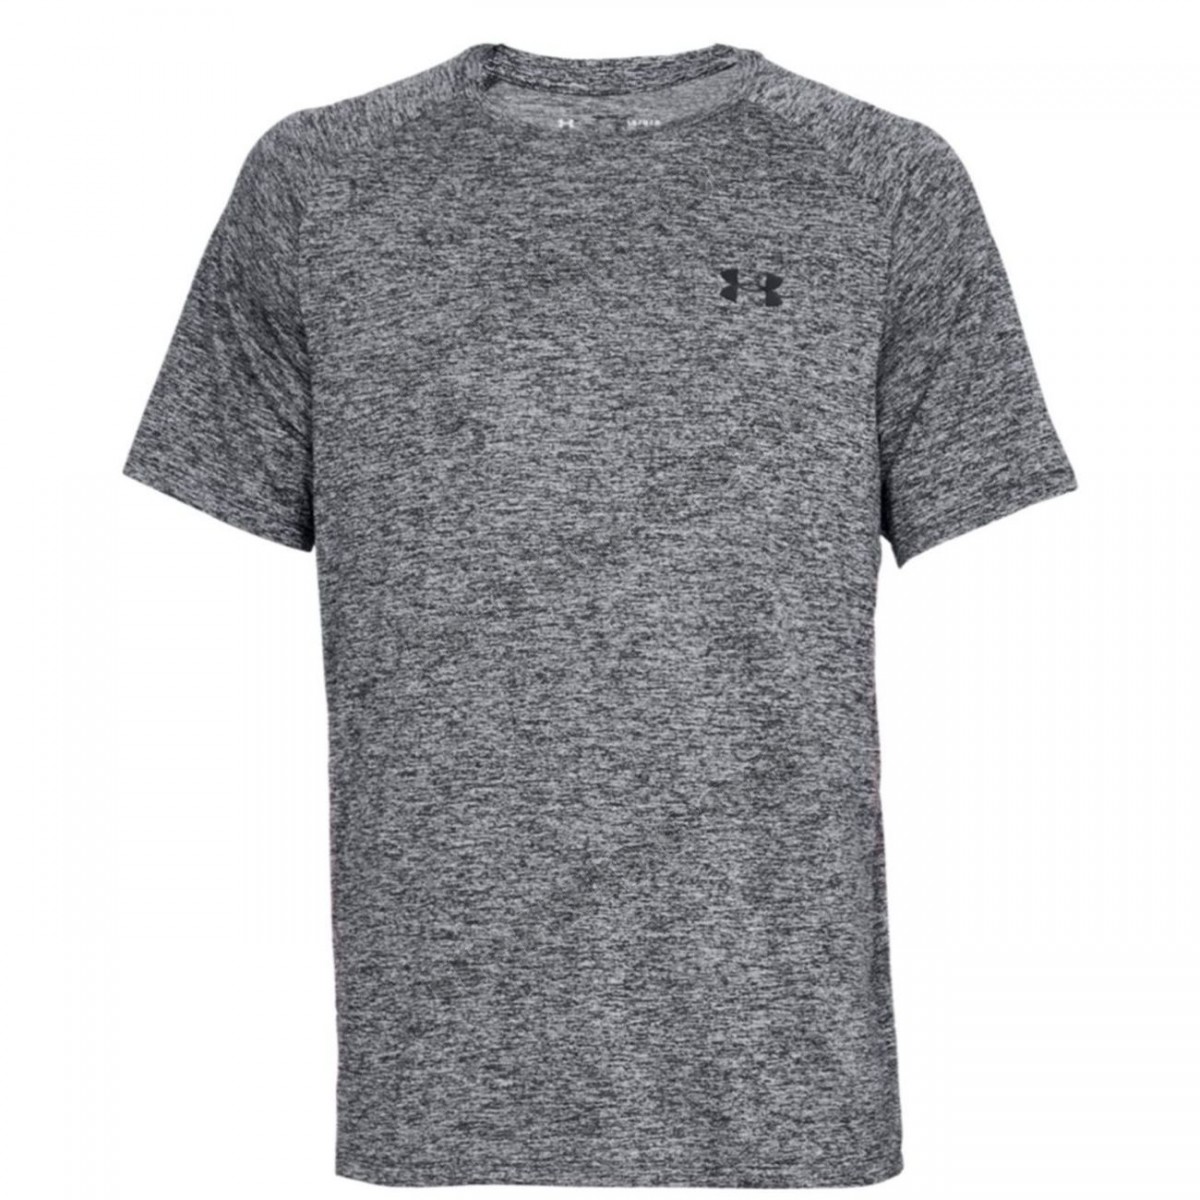 Under Armour/running adulte UNDER ARMOUR Maillot running manches courtes - Homme - UA005 - gris √ Nouveau style √ Soldes - -0